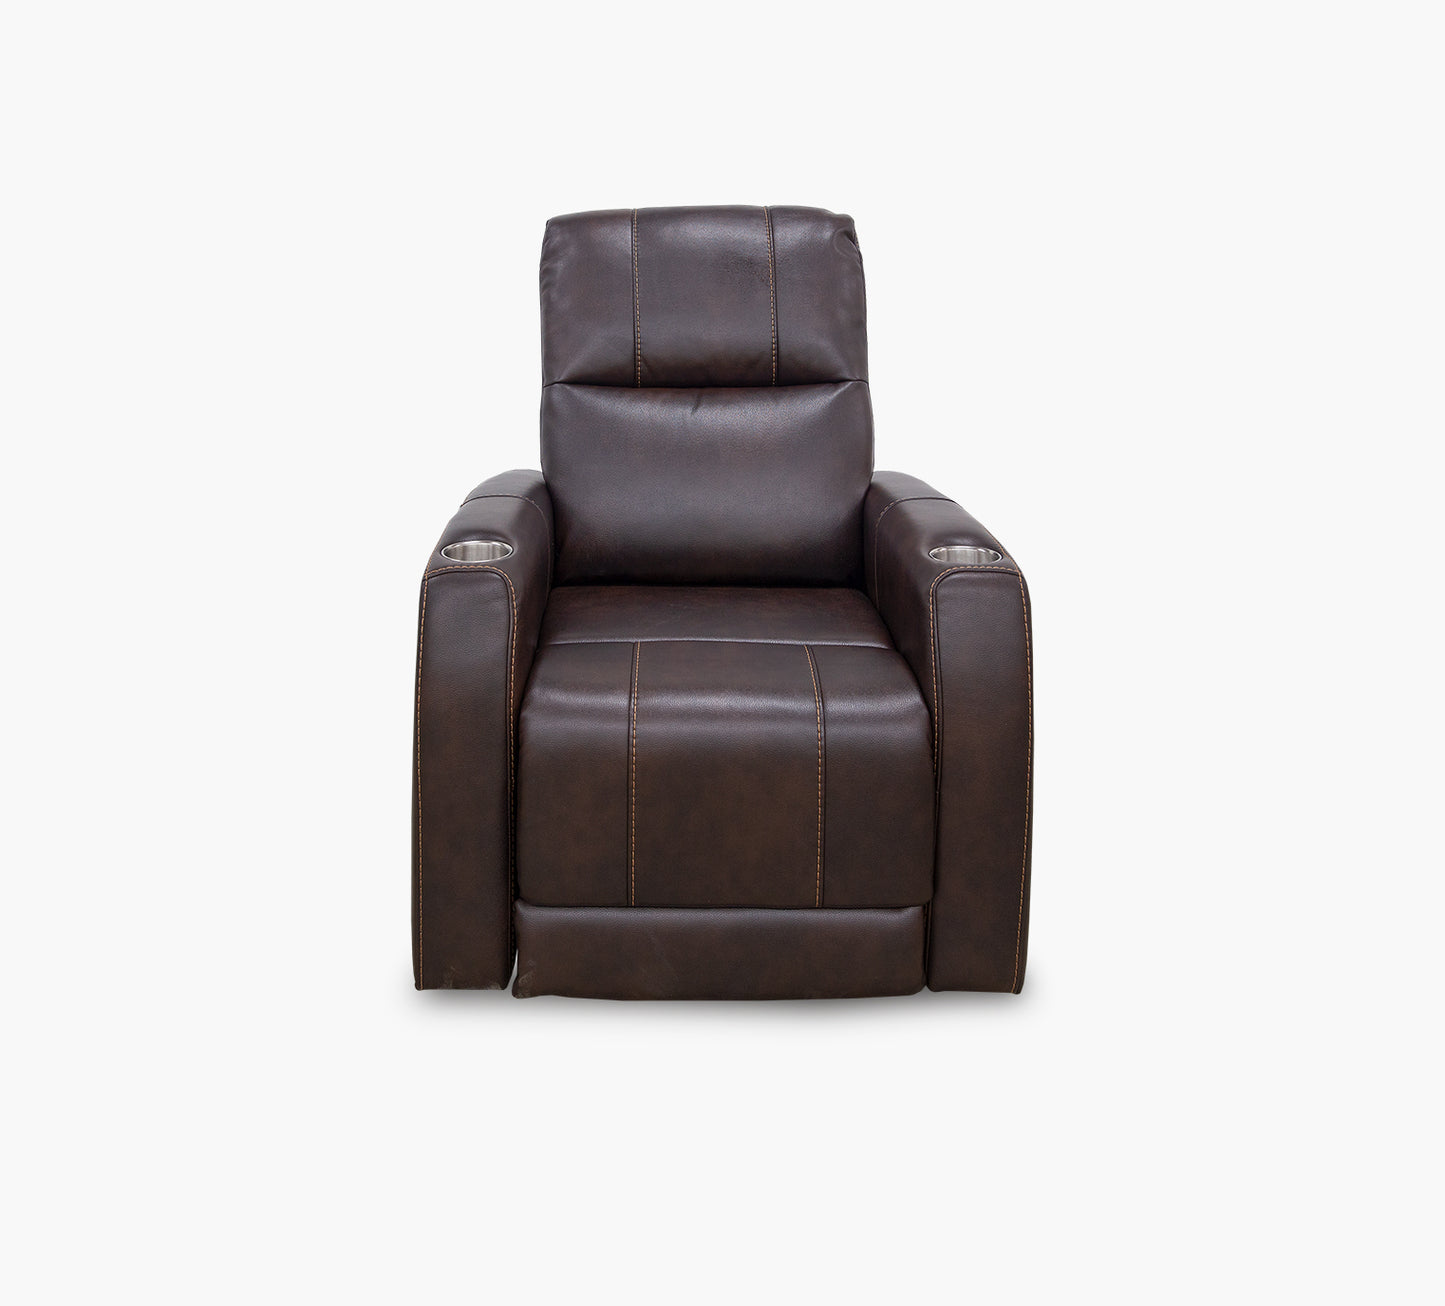 Nicholas Power Home Theater Recliner